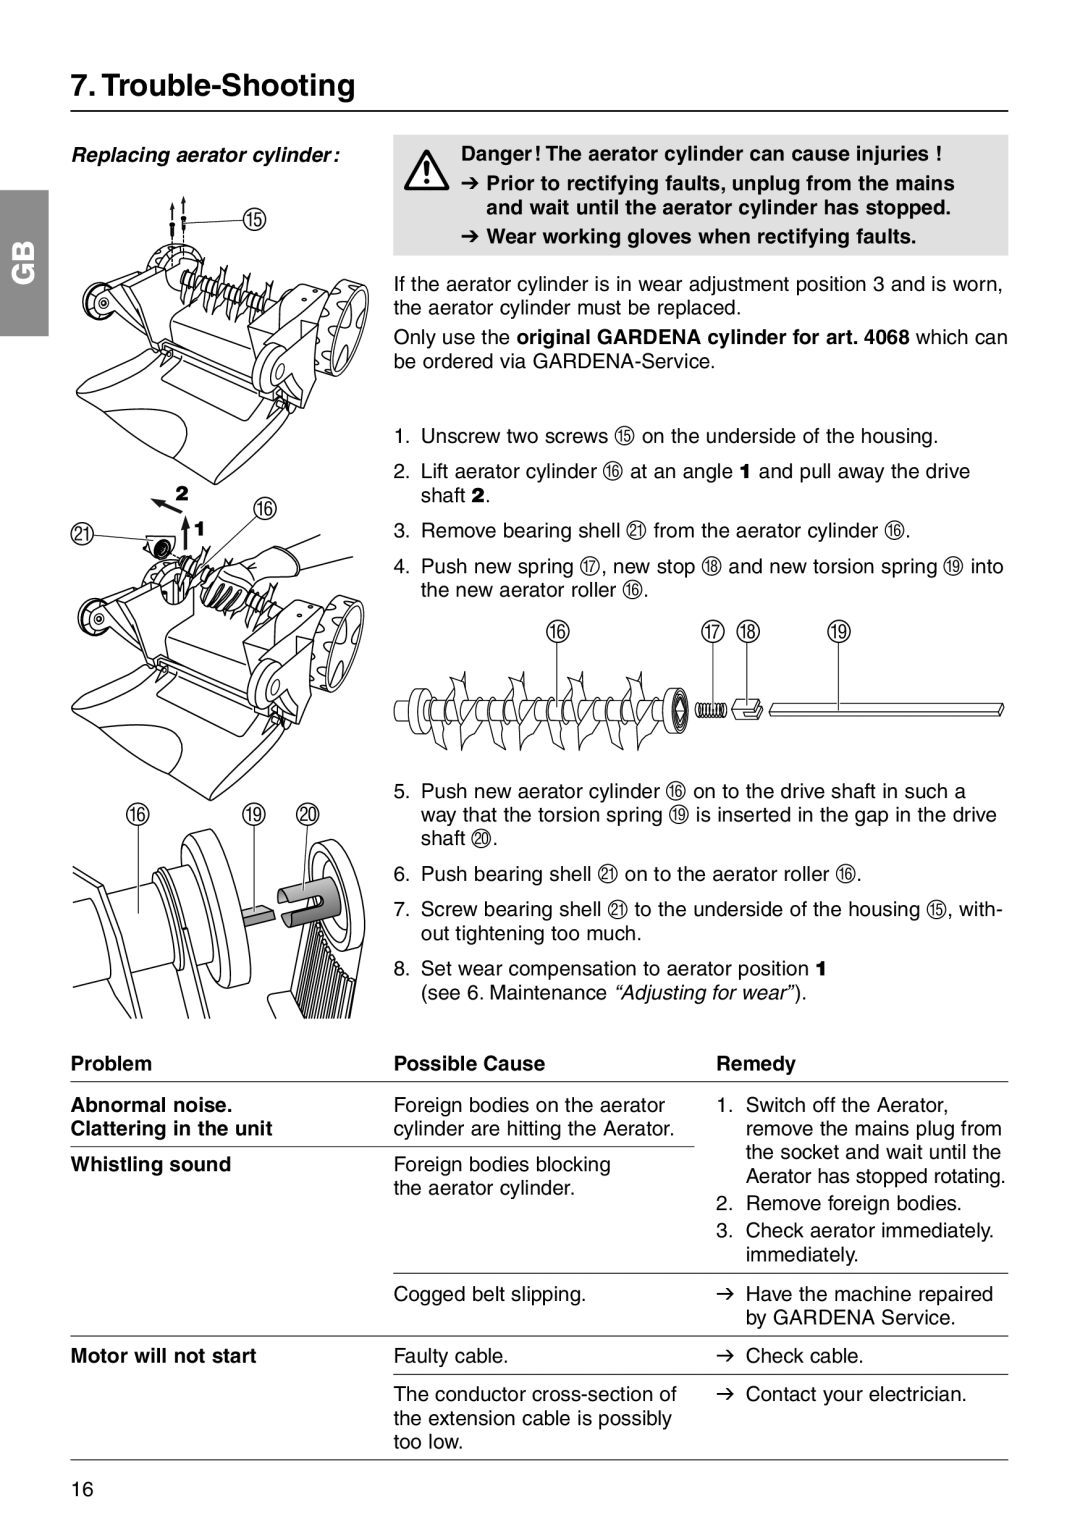 Gardena EVC1000 operating instructions Trouble-Shooting, Replacing aerator cylinder 